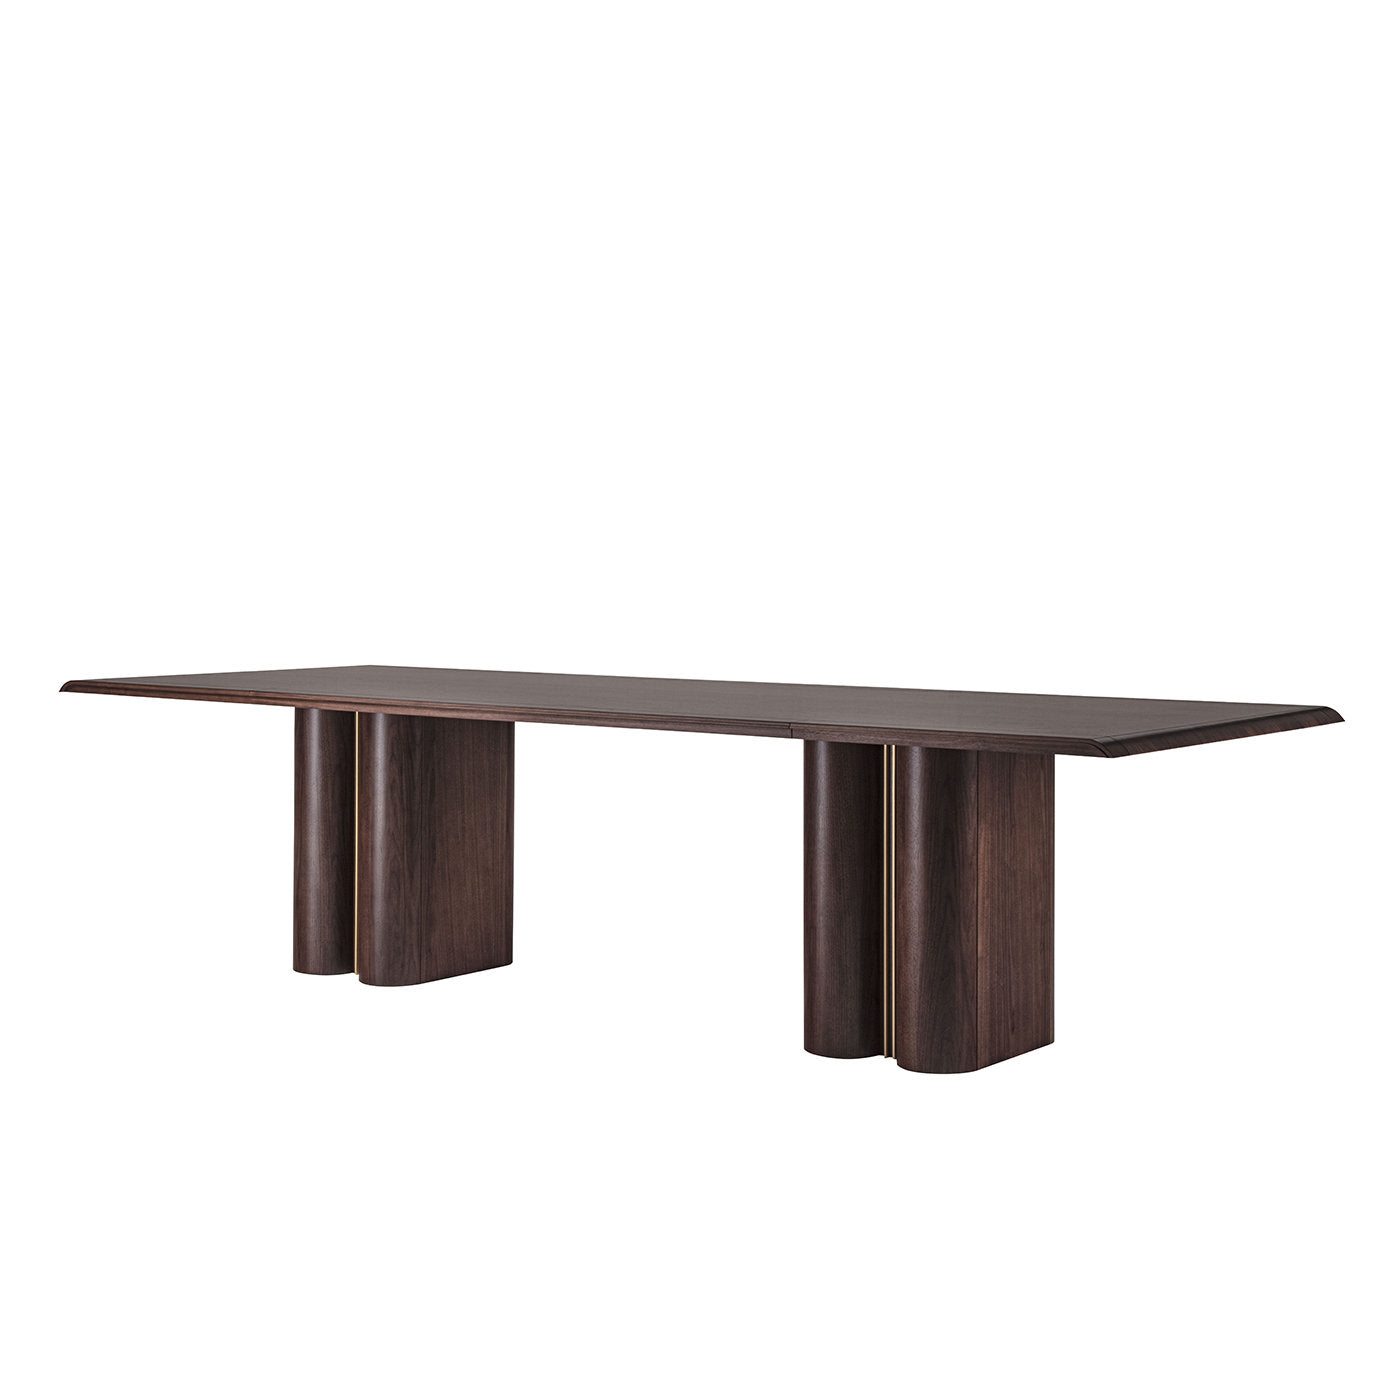 Tomo Dining Table - Alternative view 1